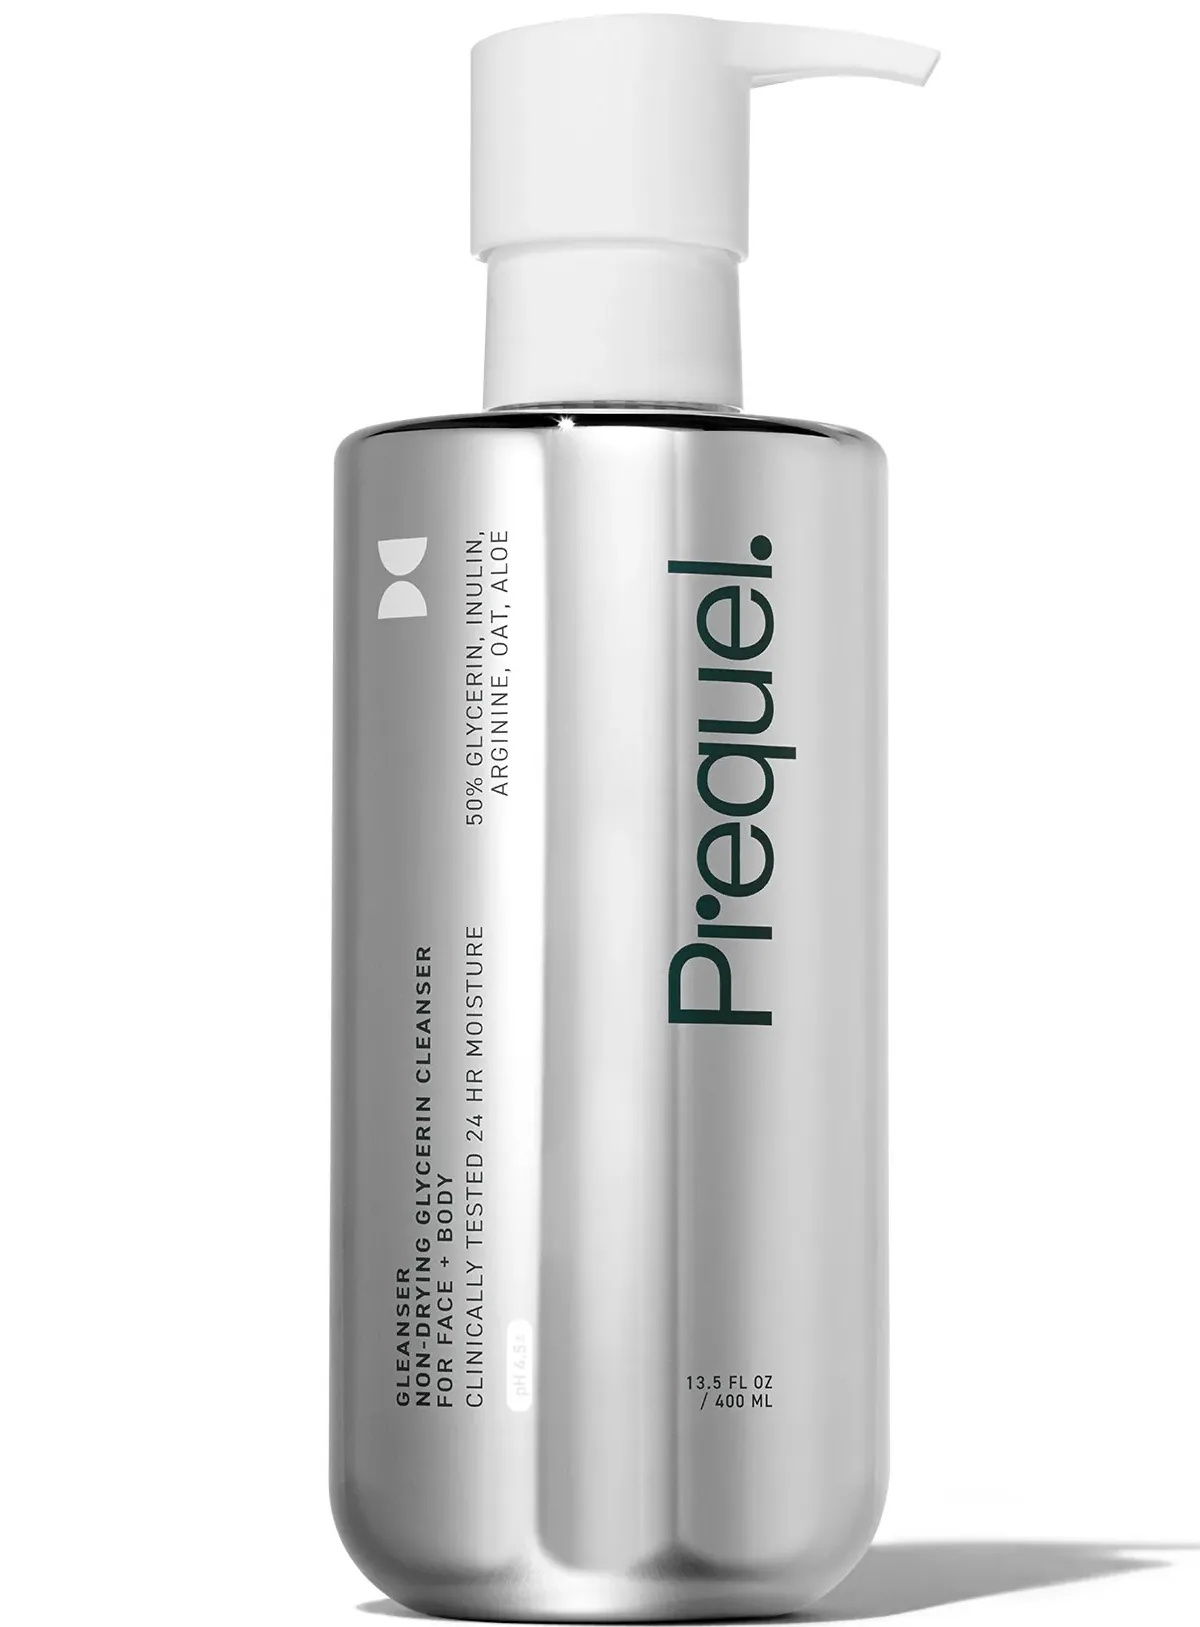 Prequel Gleanser Non-drying Glycerin Cleanser For Face And Body